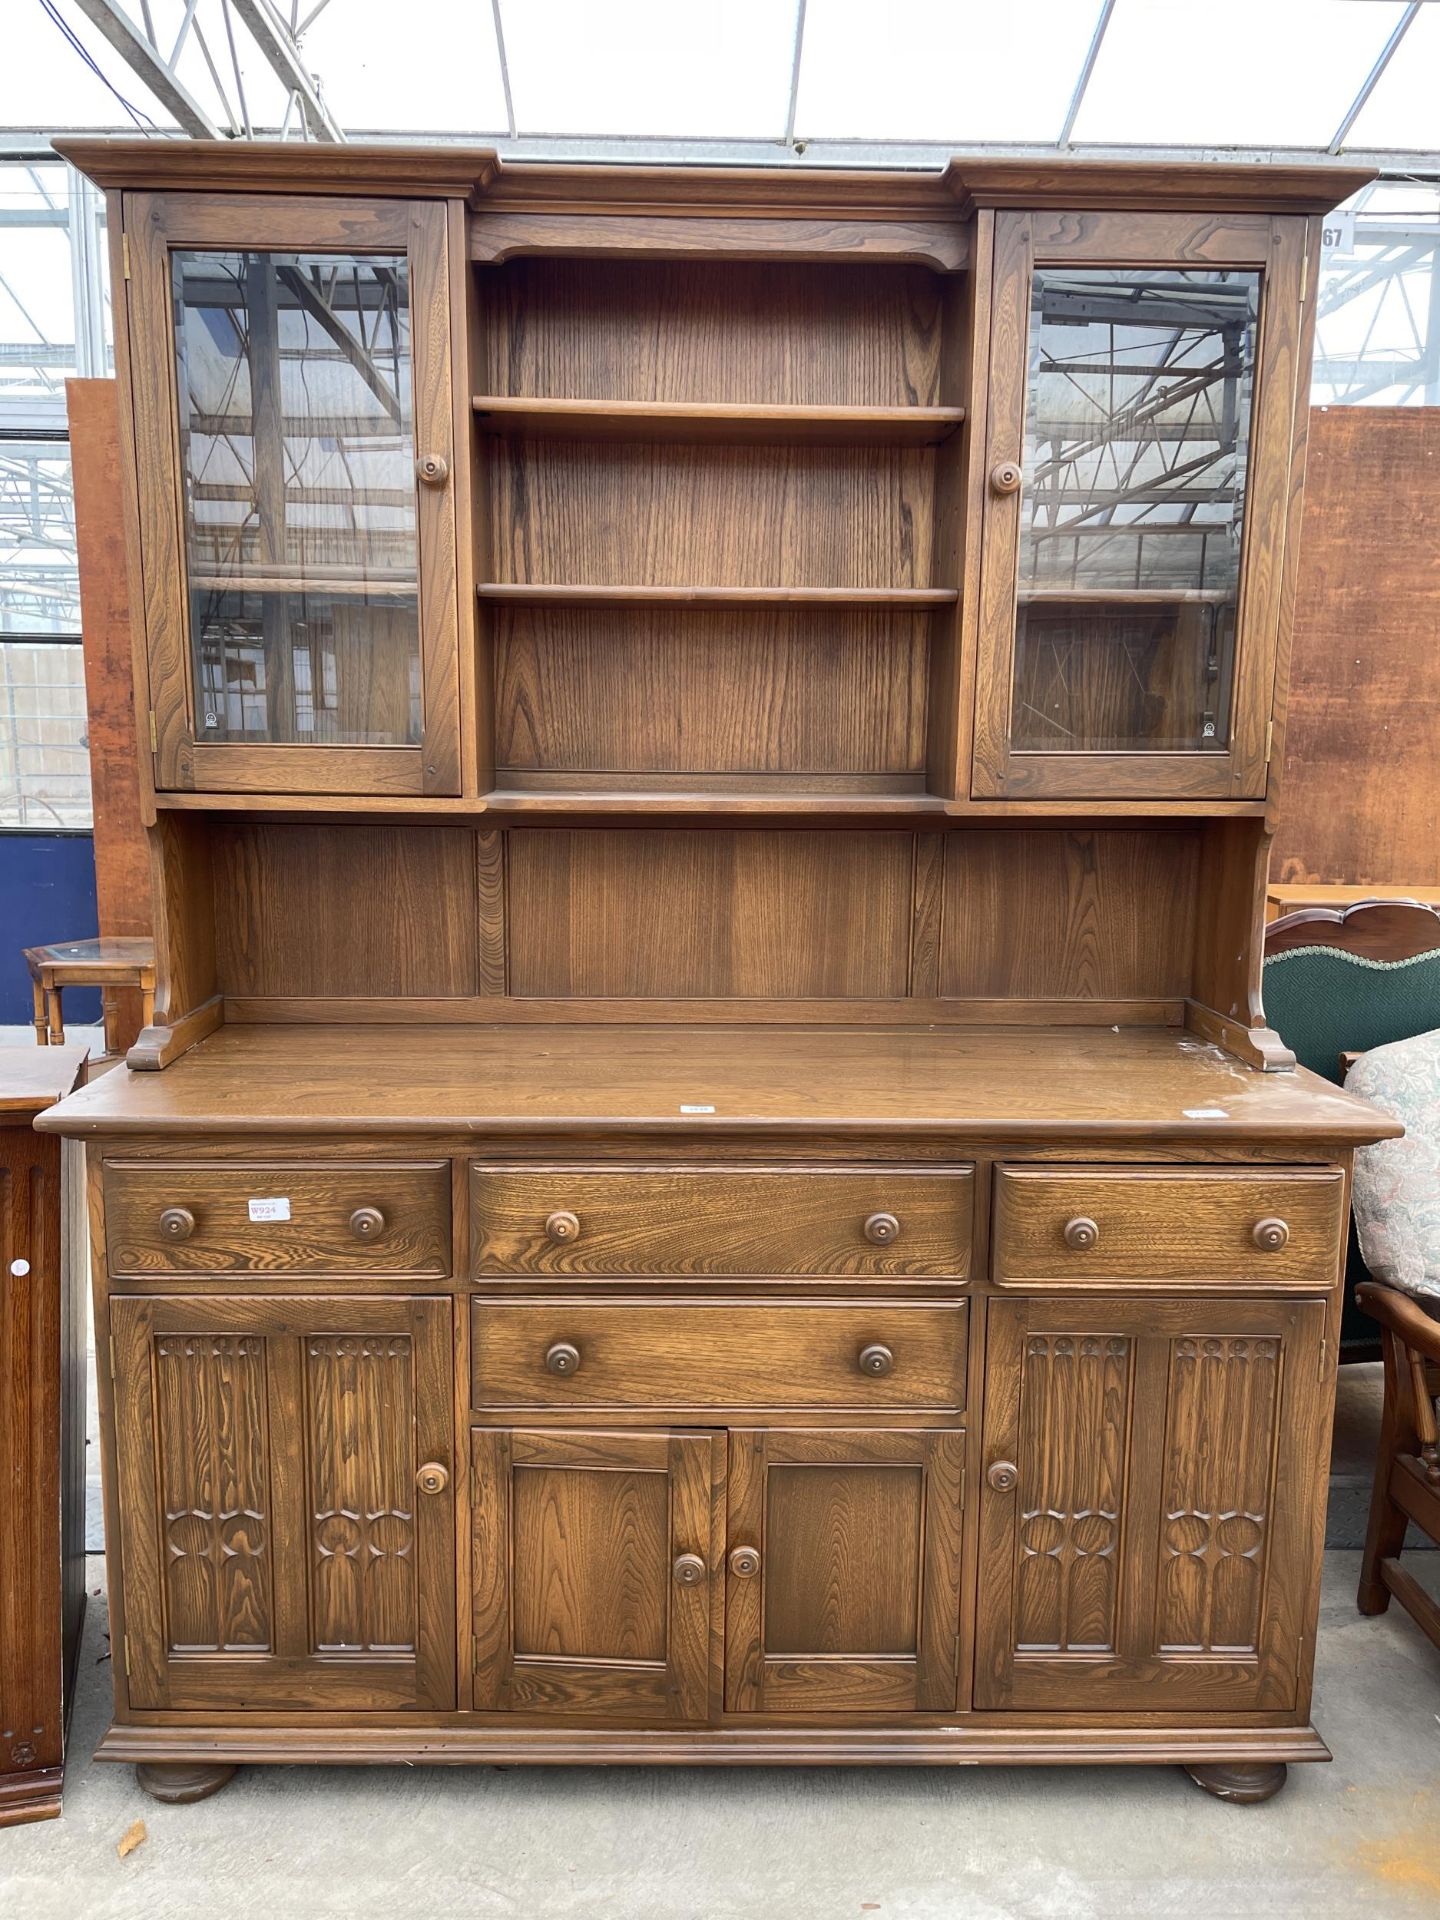 AN ERCOL ELM DRESSER WITH FOUR DRAWERS AND CUPBOARDS TO THE BASE, THE UPPER PORTION HAVING SHELVES